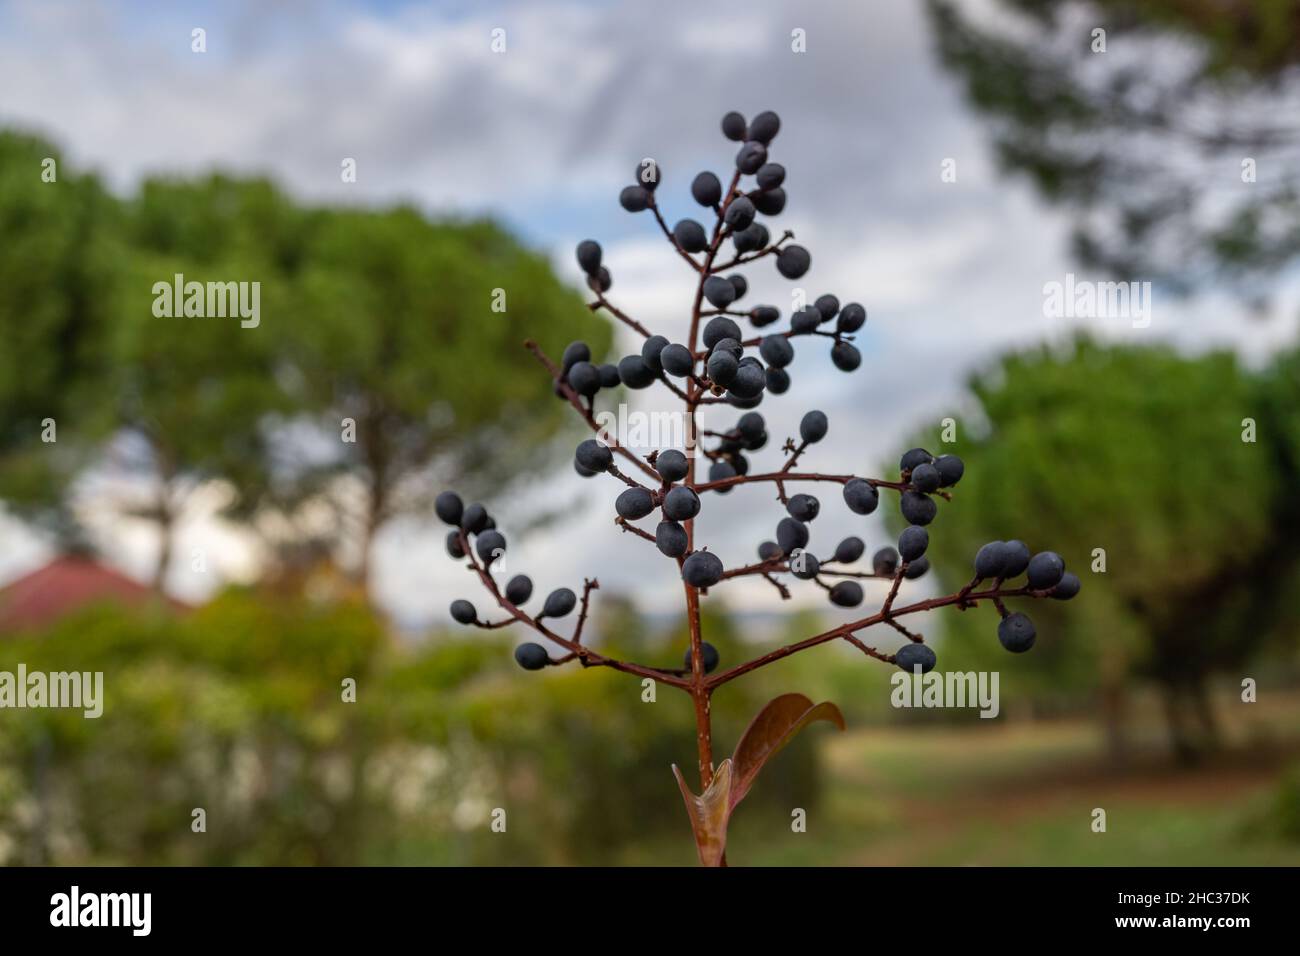 Branches with ripe fruit of wild black cherry or Prunus serotina in foreground with out-of-focus background. Stock Photo